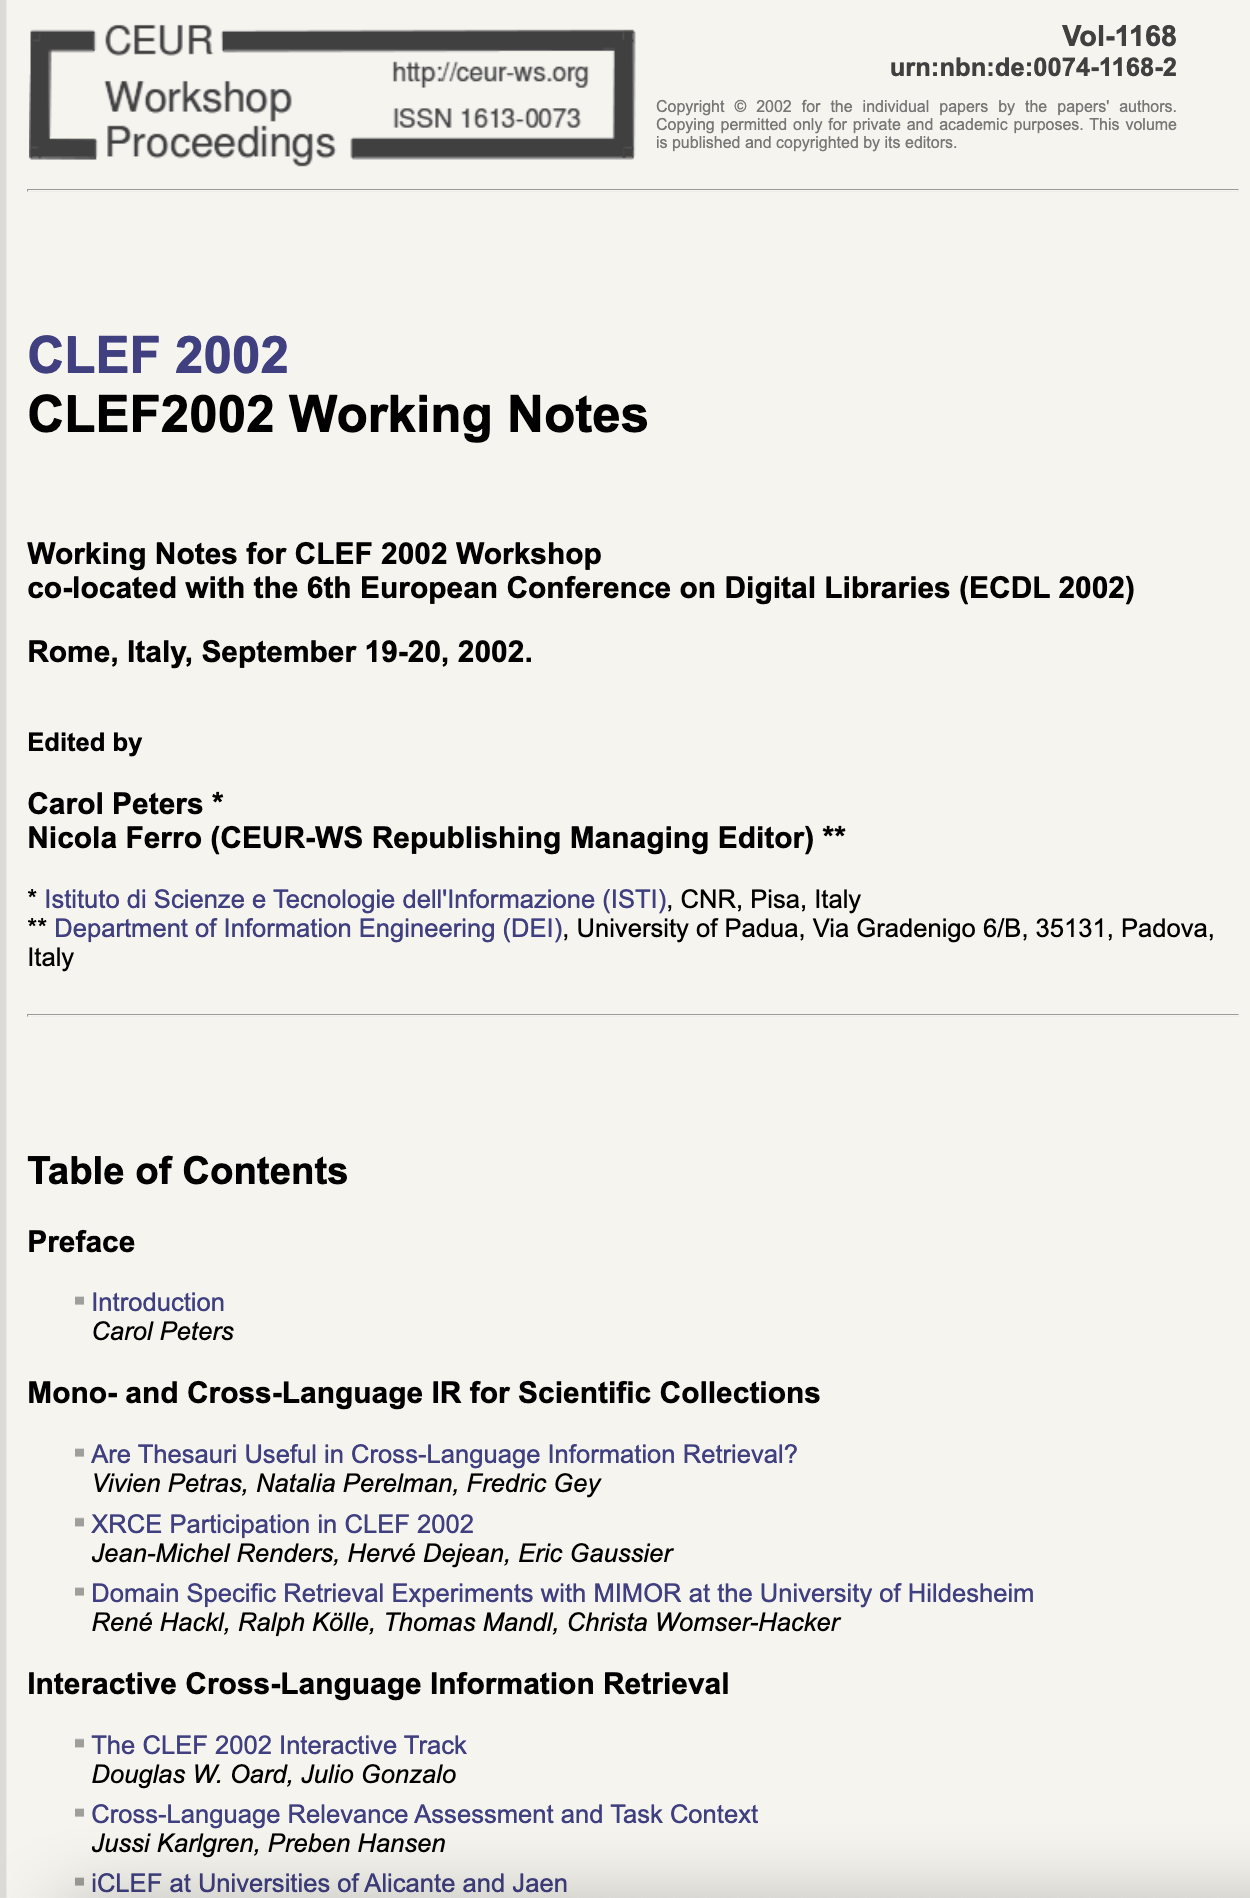 CLEF 2002 CEUR-WS Working Notes page